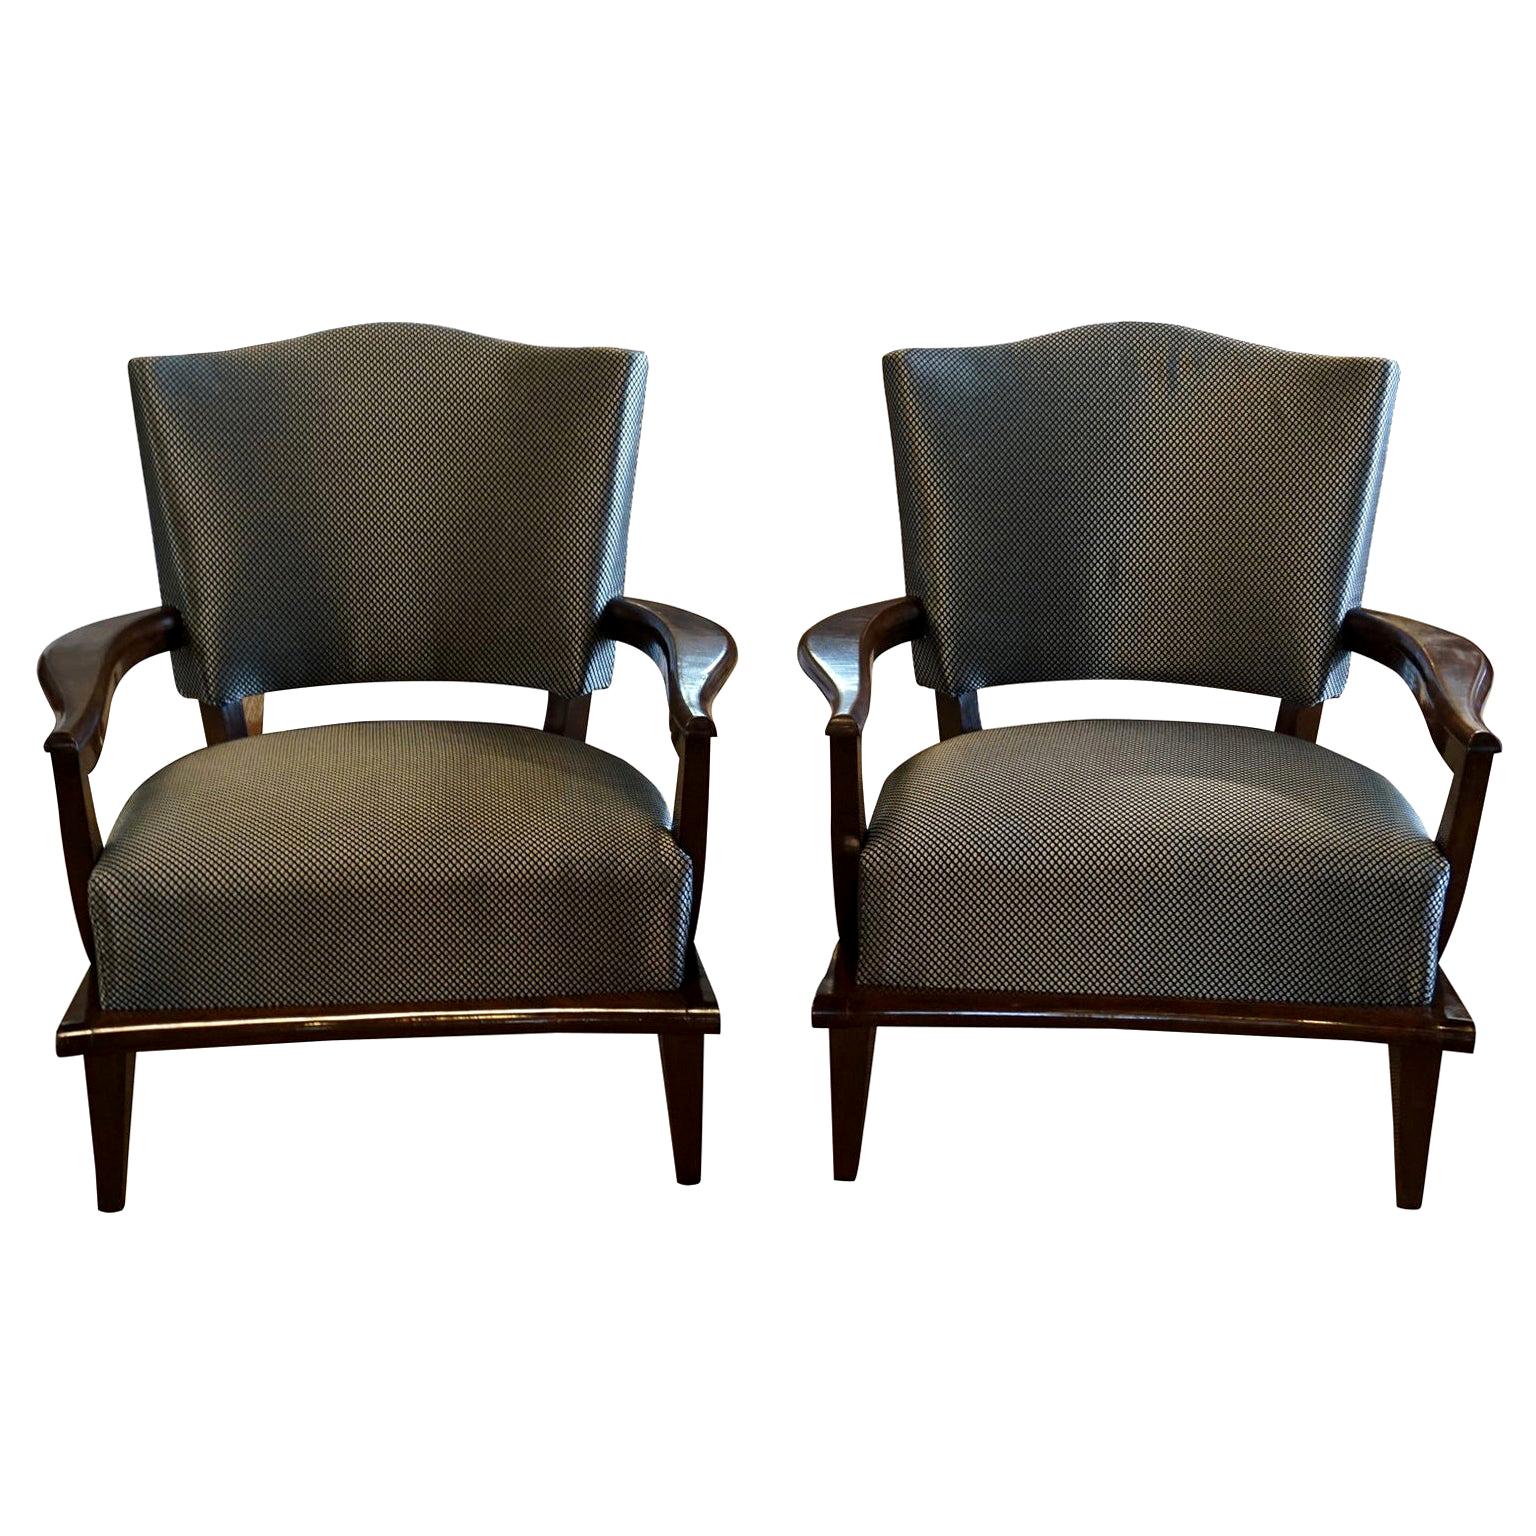 20th Century Pair of French Oakwood Armchairs by Etienne-Henri Martin